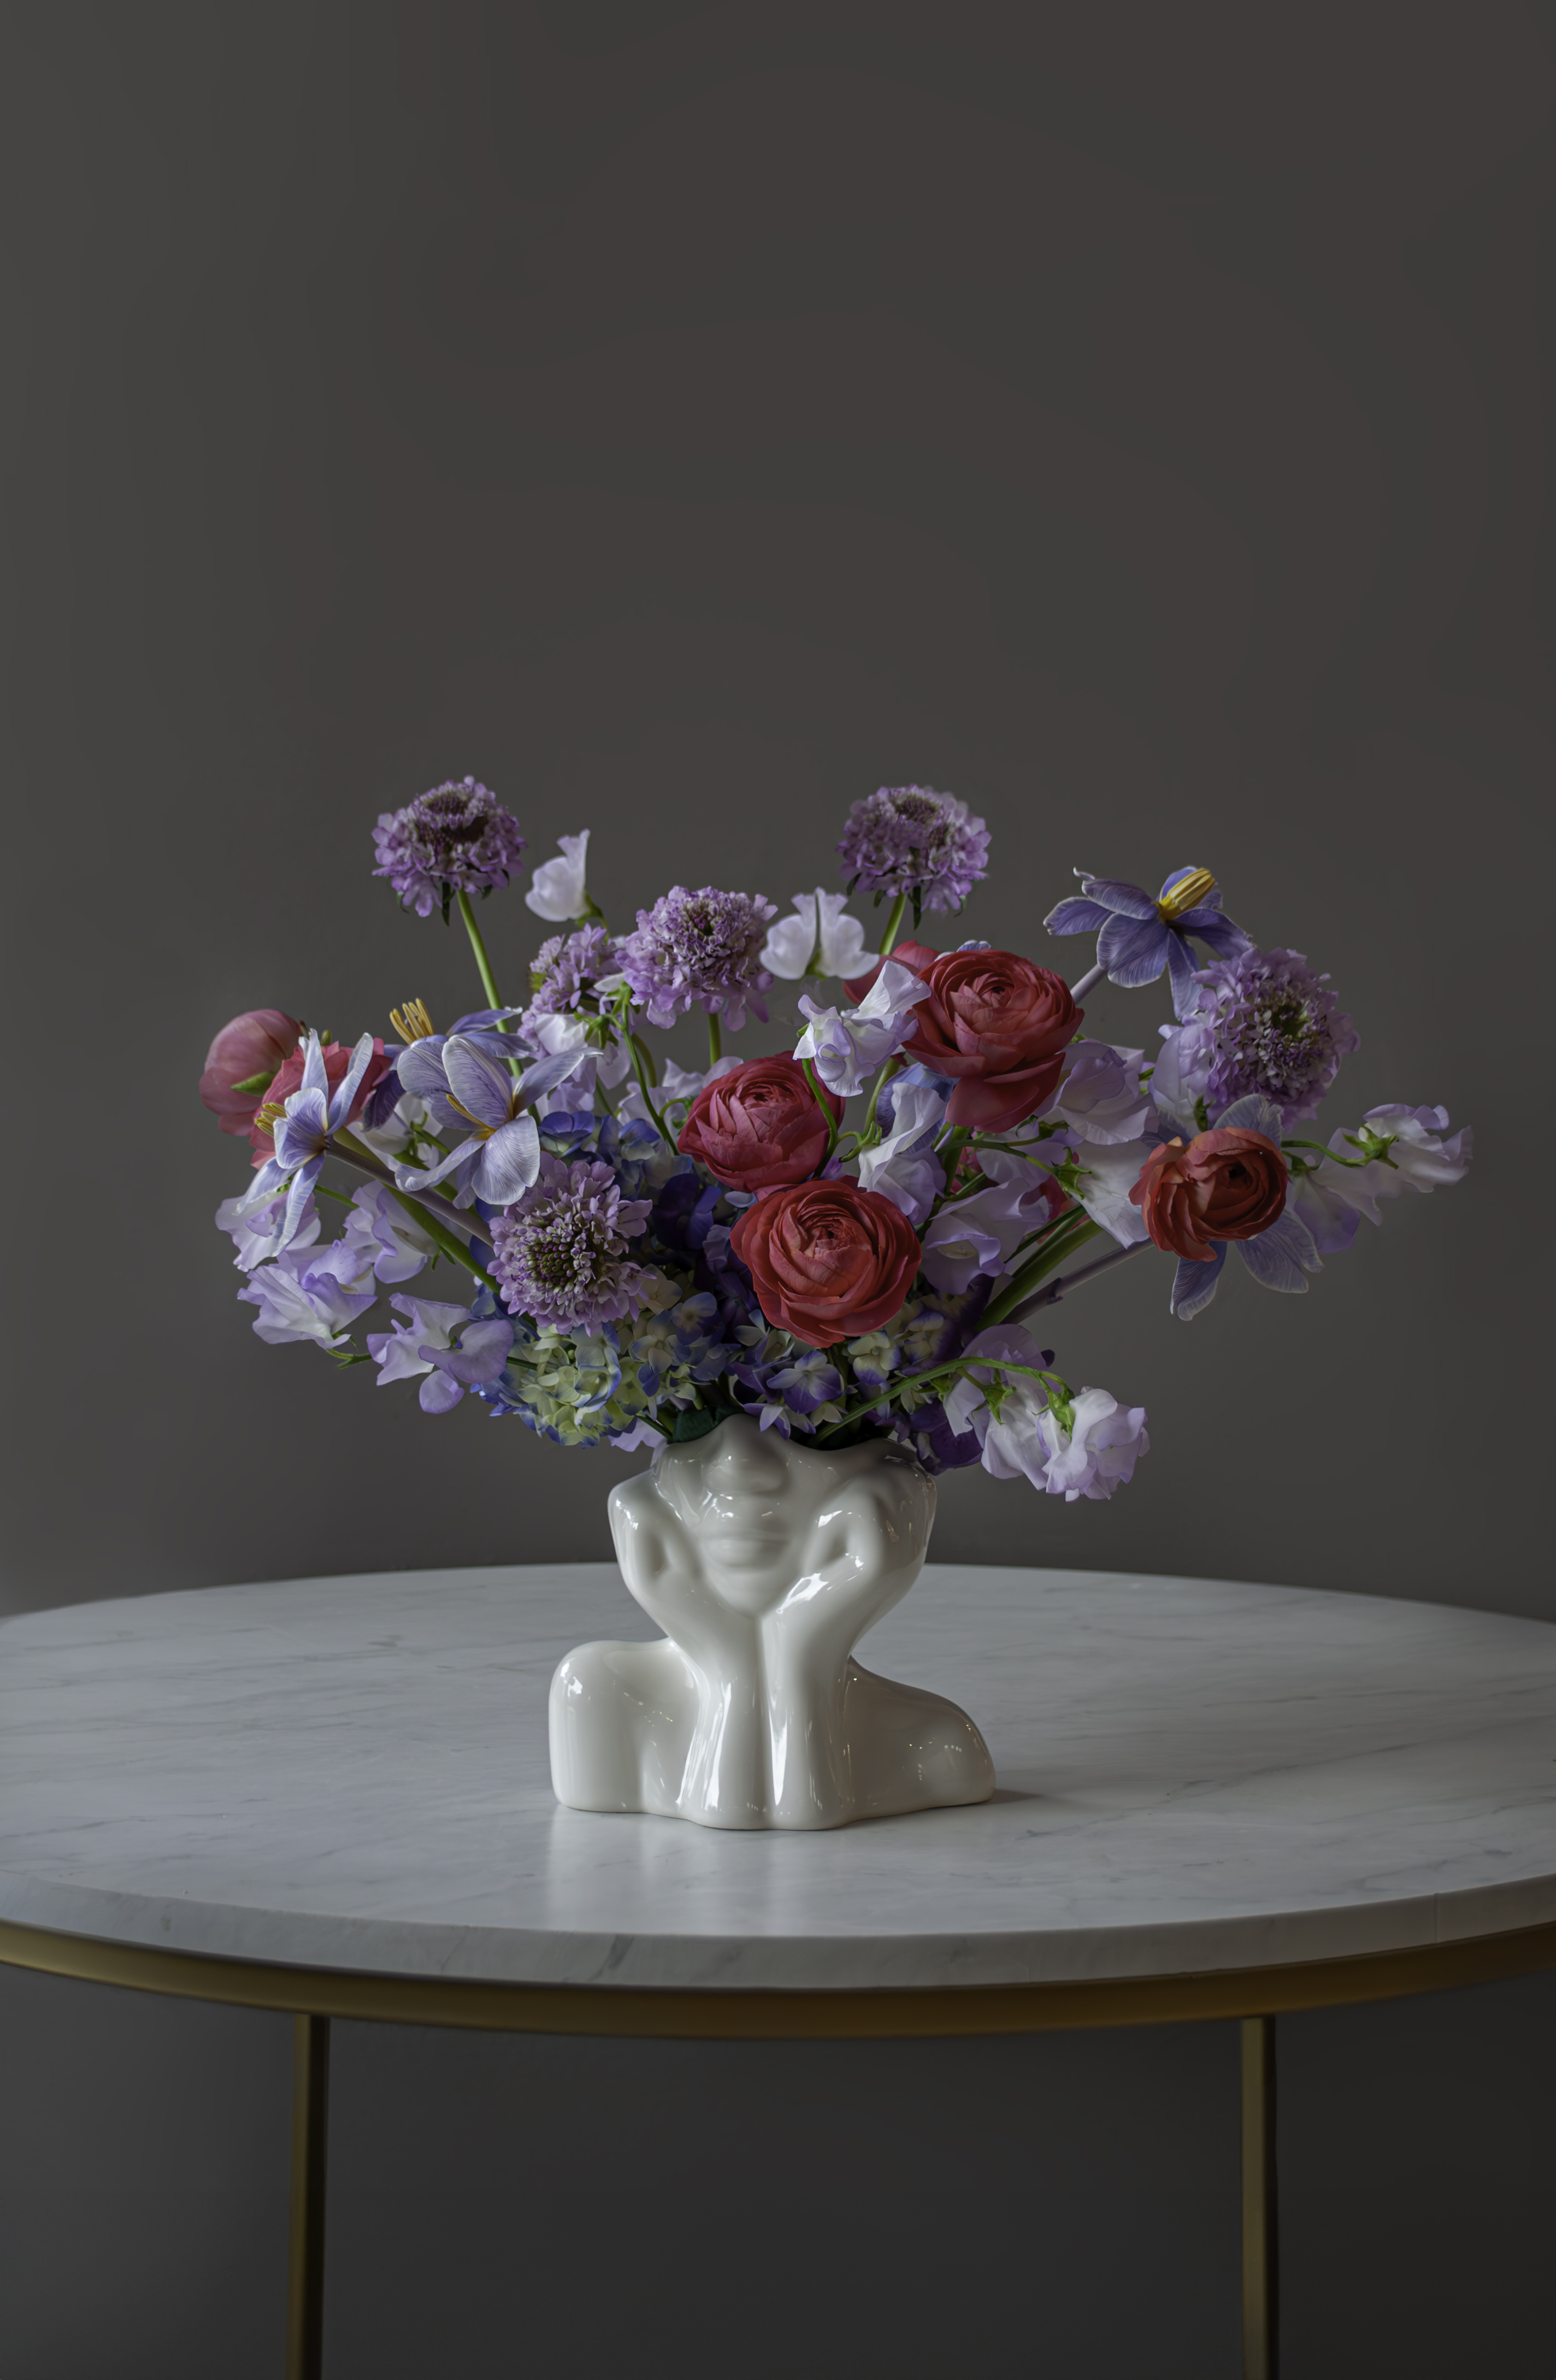 Lady in Blossom - Flower arrangement in a vase